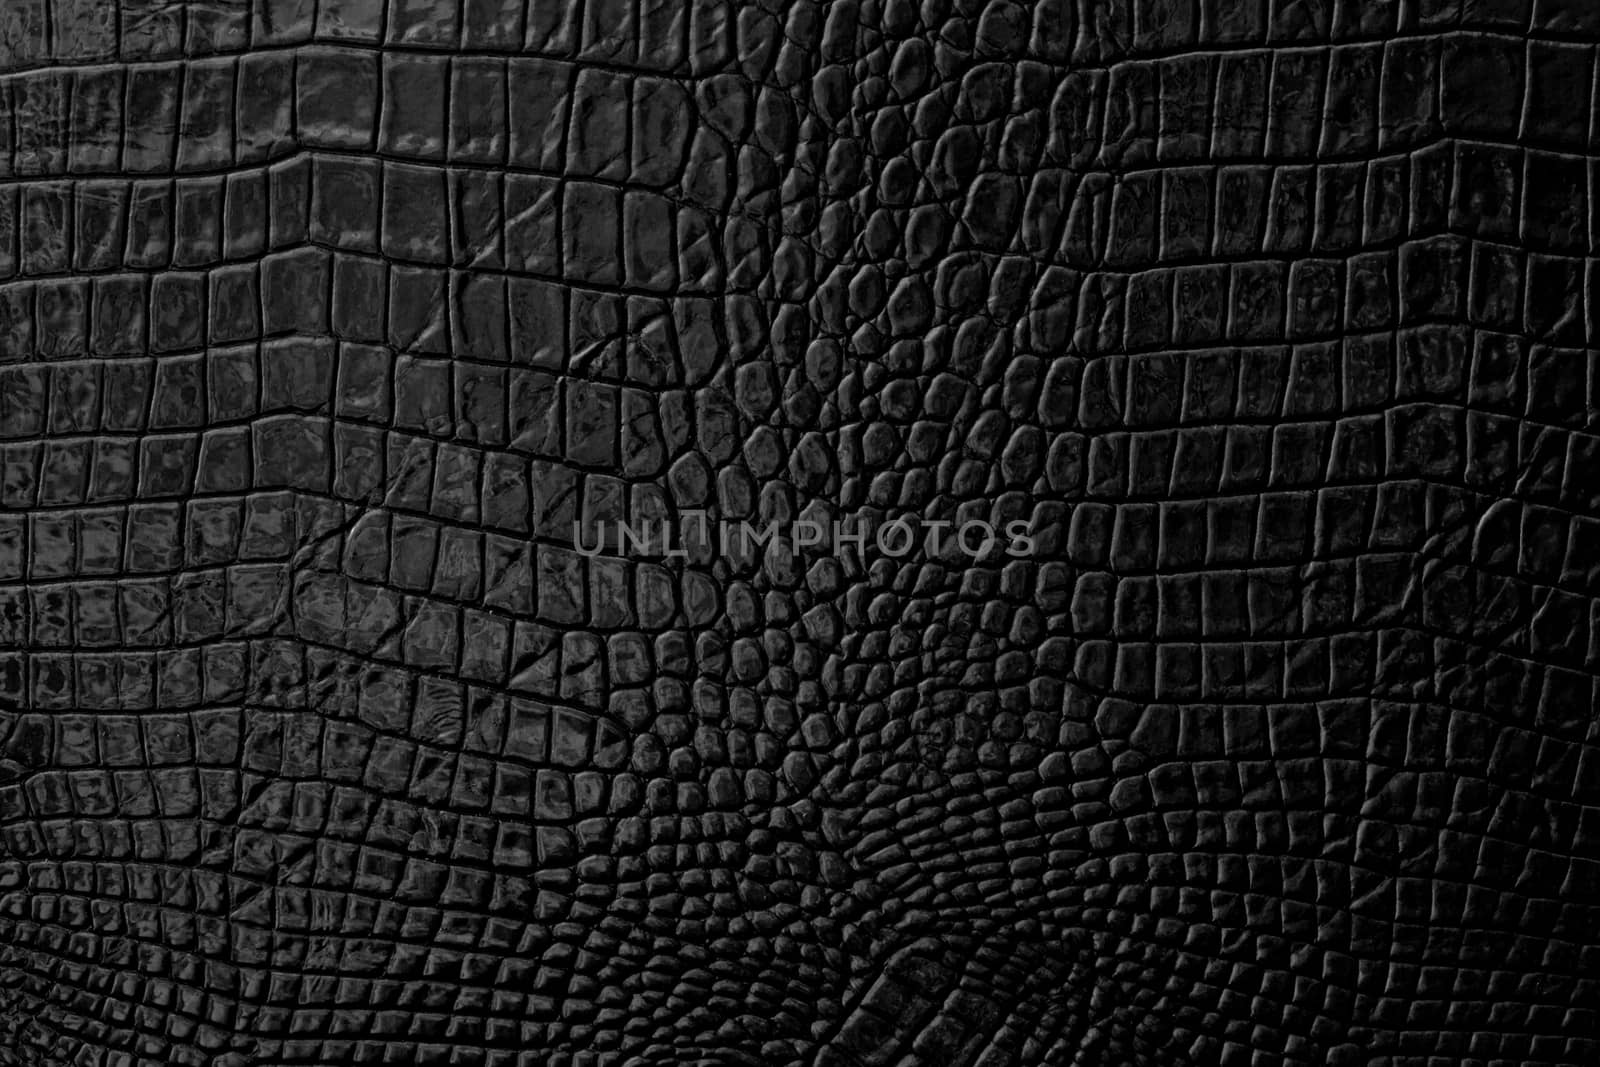 Black Leather background and texture